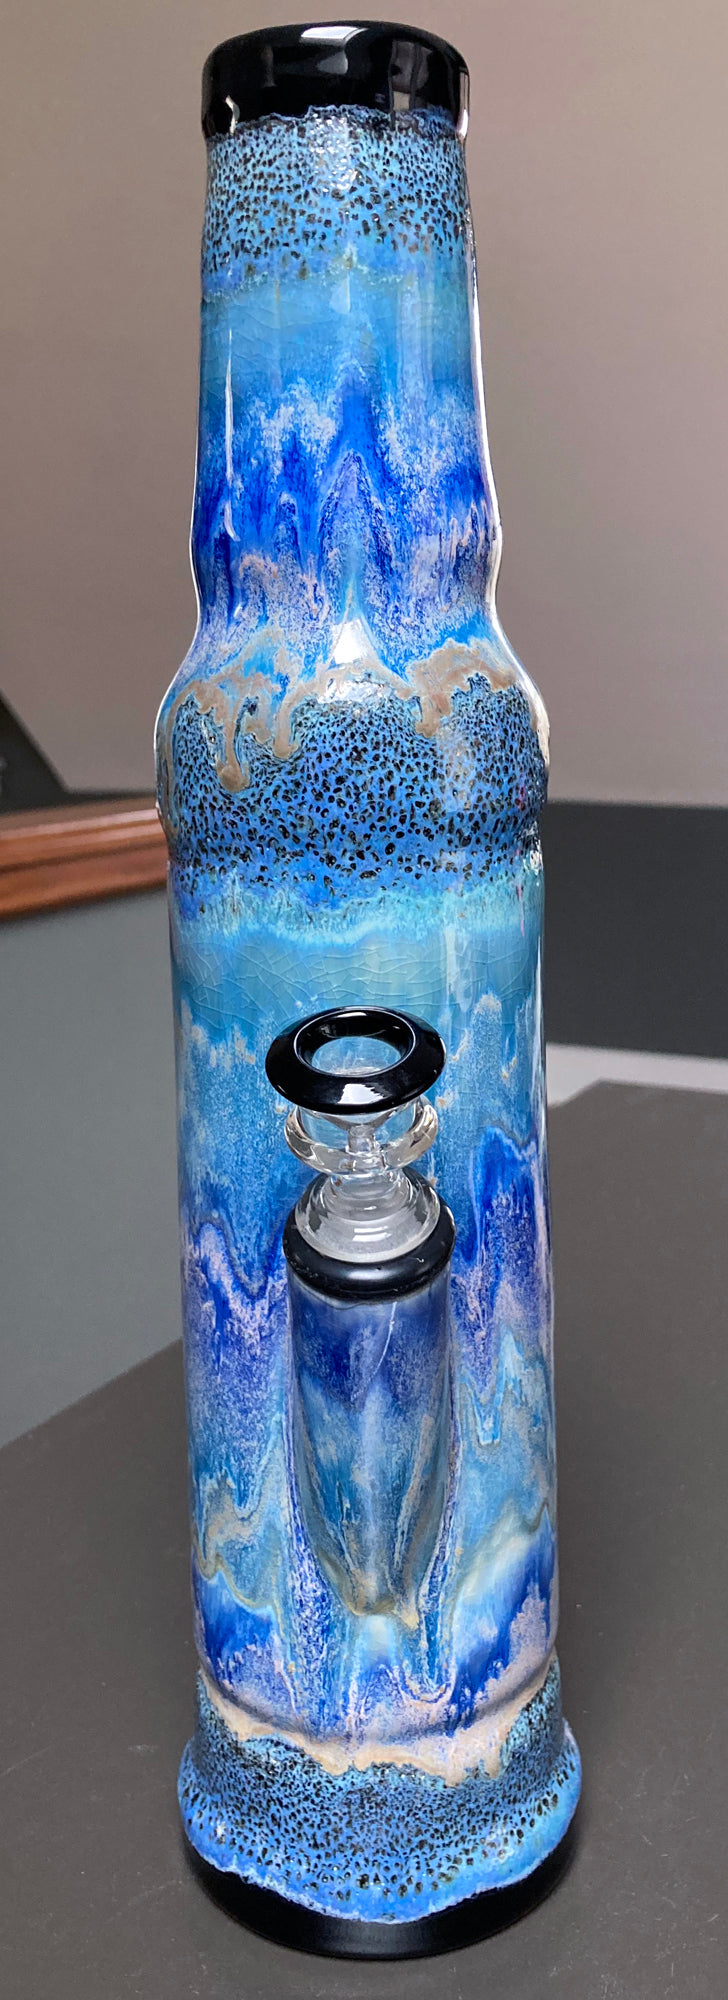 Ceramic Bong - Waterfall - One of a Kind!